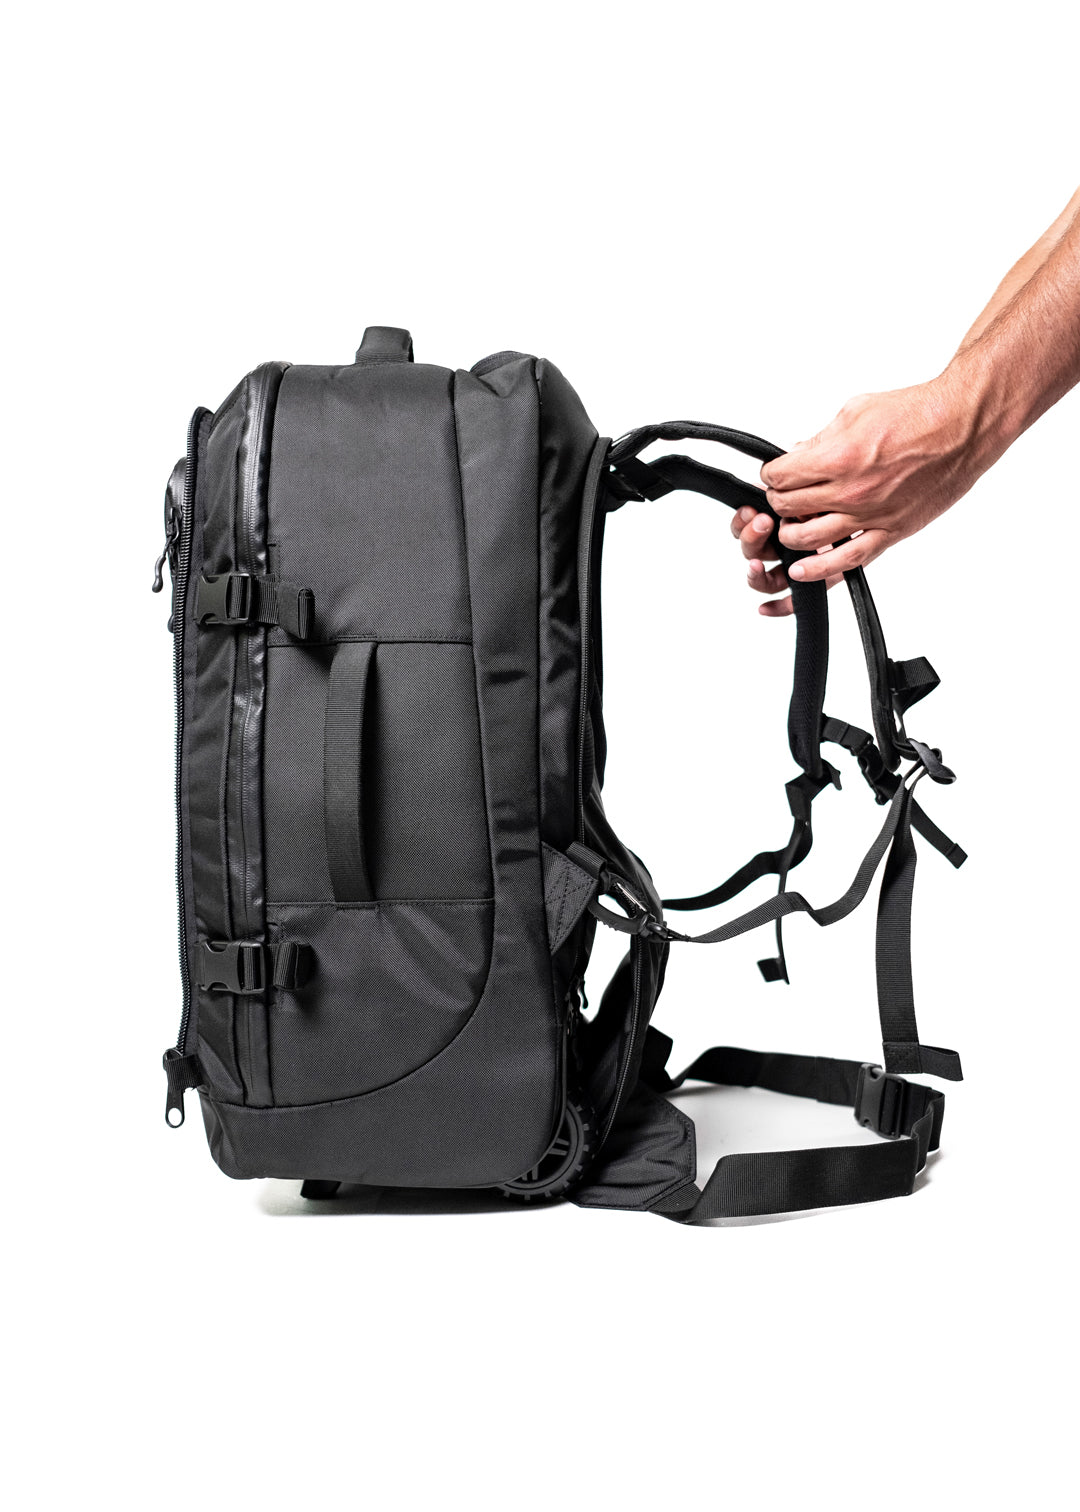 Hypath 2-in-1 Transformer Backpack (Out of Stock until late July) - Click "Update Me" in Sidebar to Get Notice When We are Back in Stock